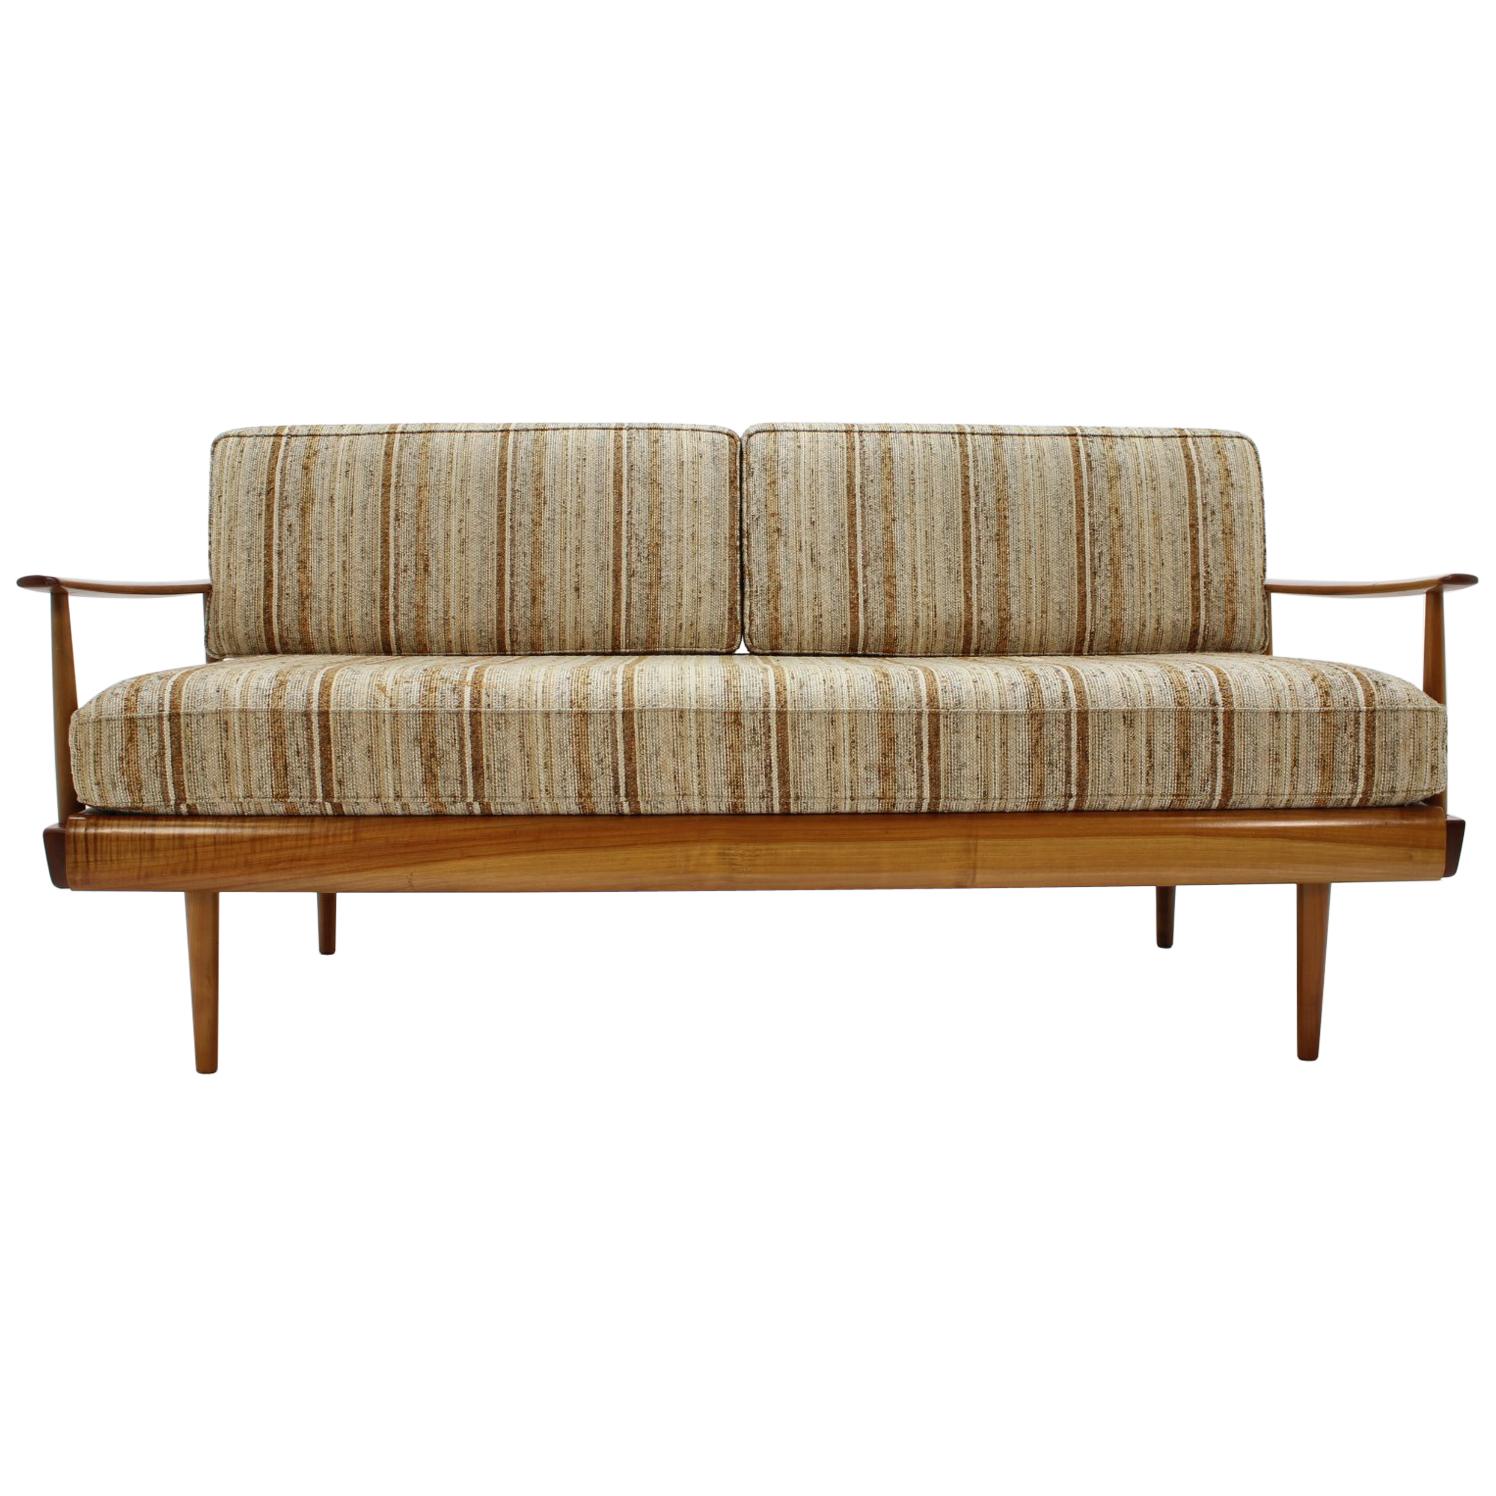 Midcentury Sofa or Daybed Designed by Wilhelm Knoll for Antimott, 1960s